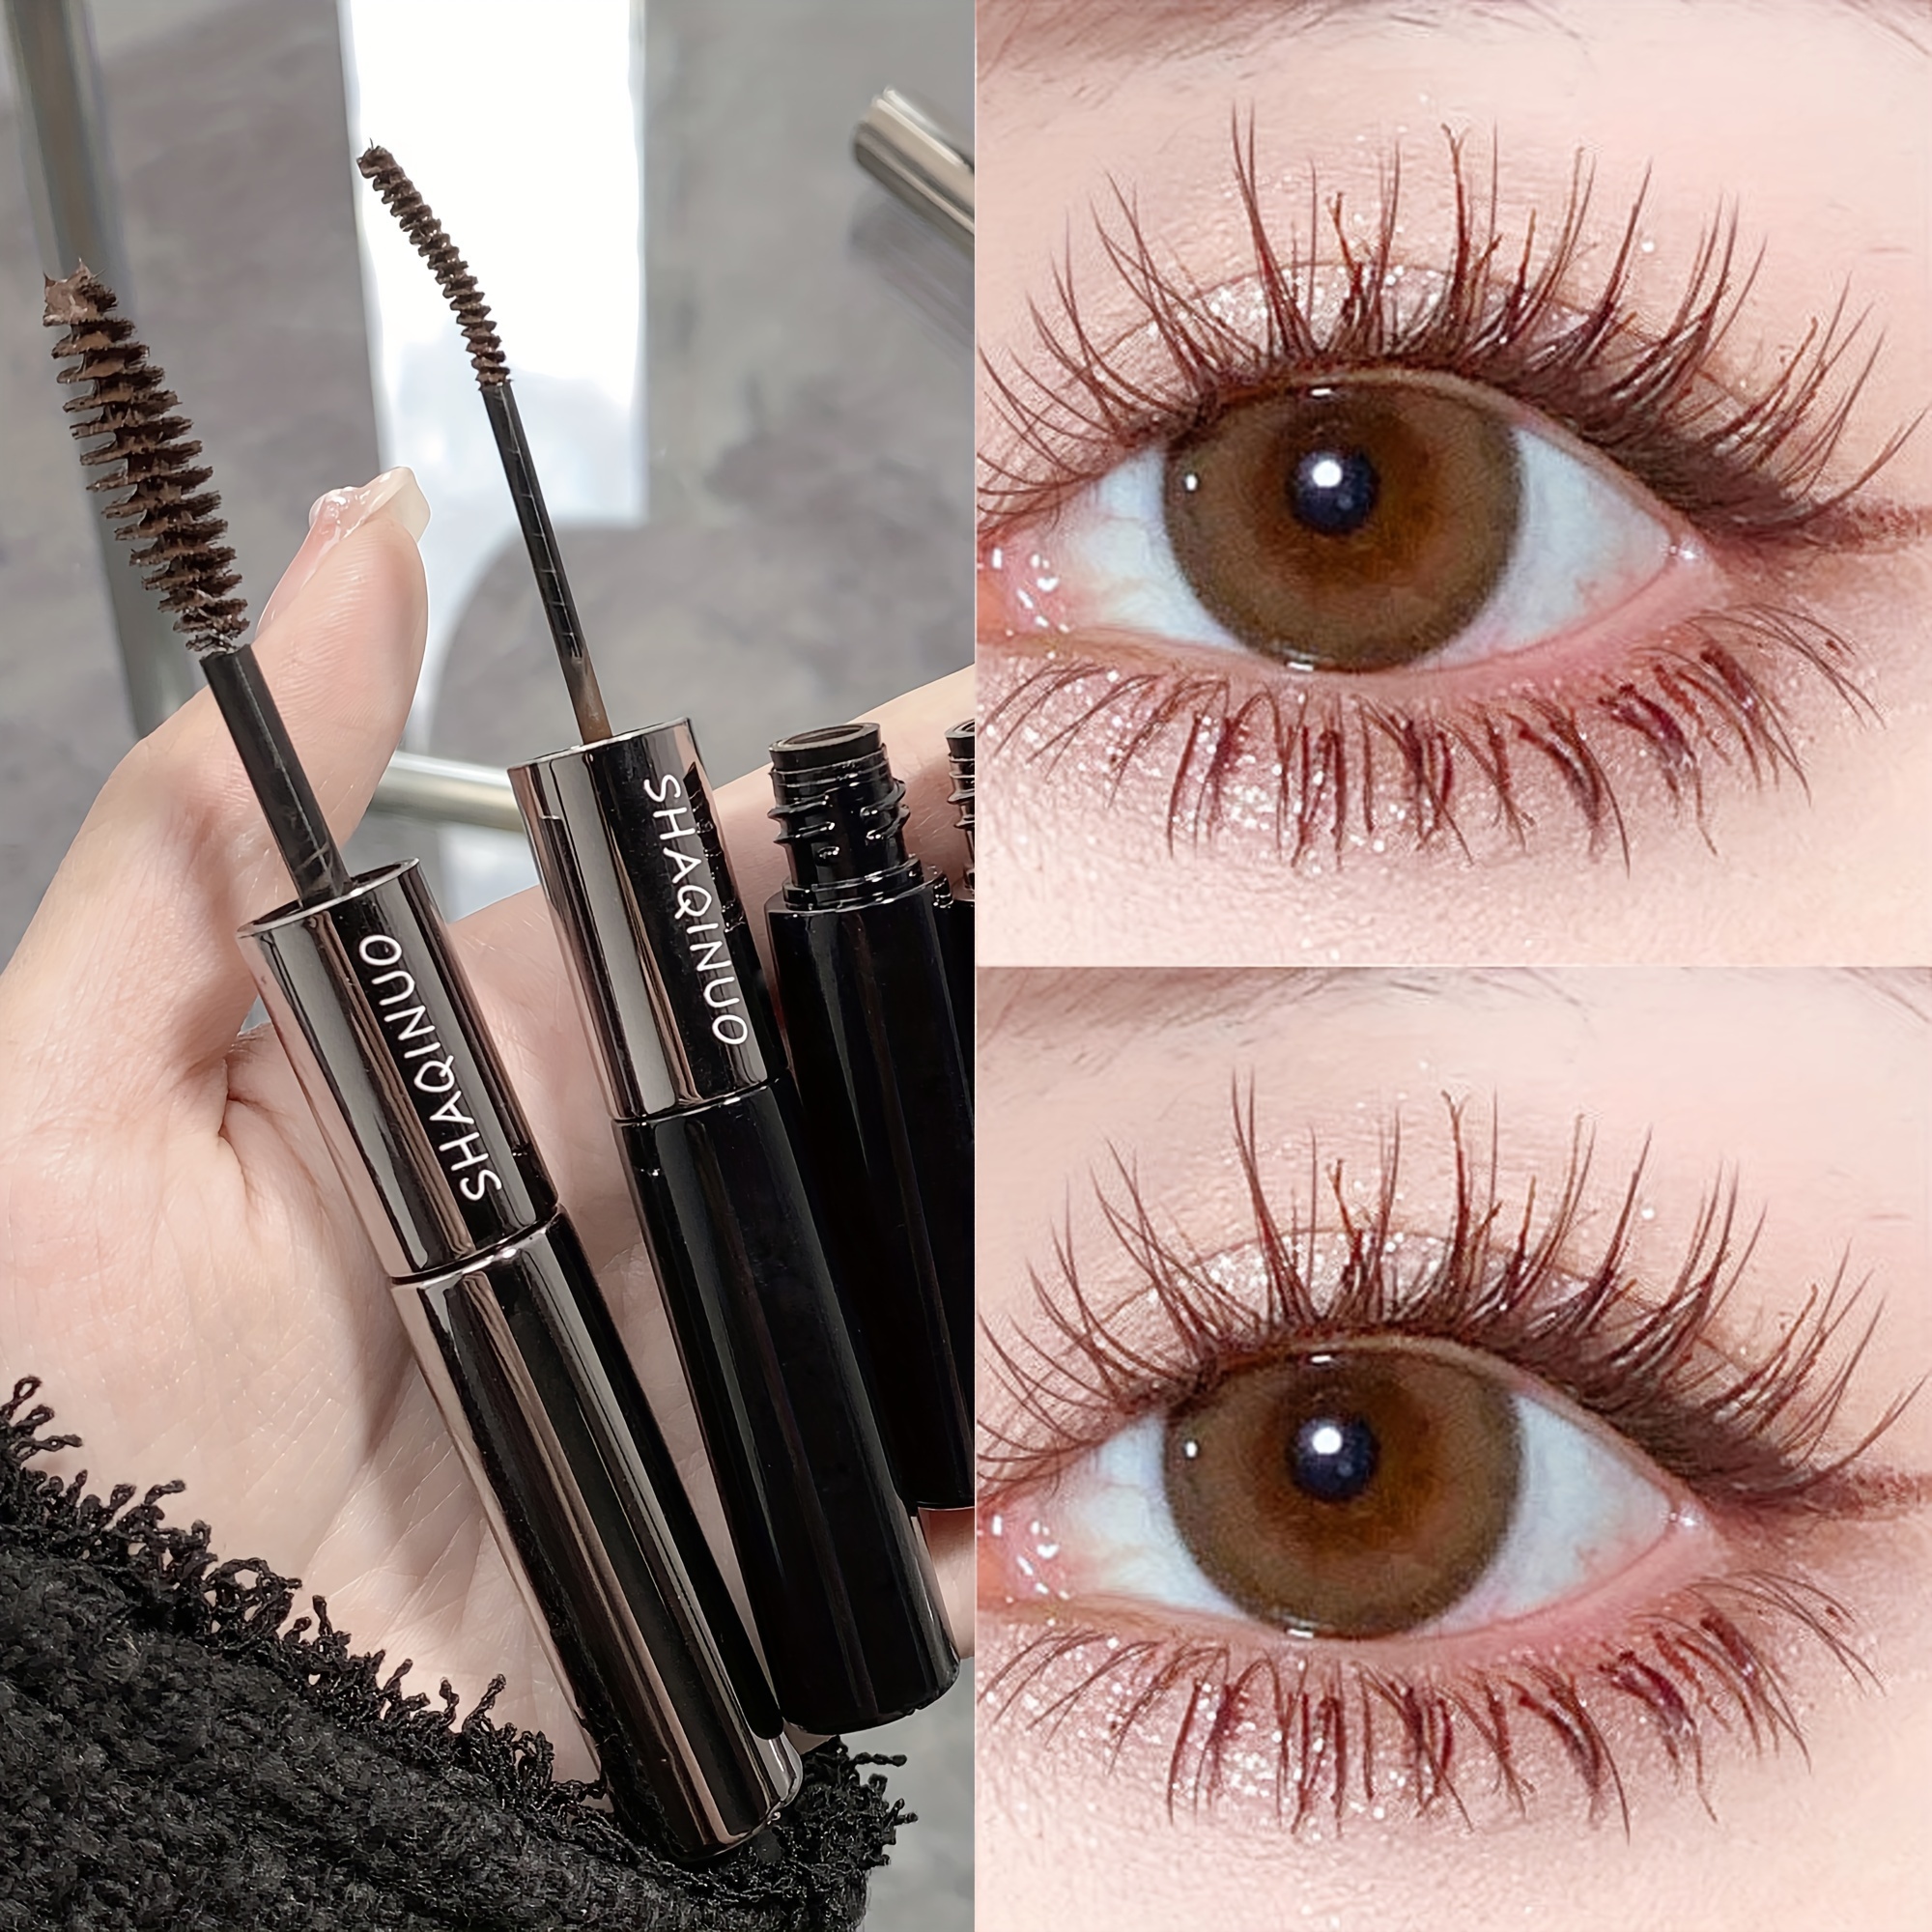 

1pc Brown Double-headed Mascara, Large Brush Head + Small Brush Head, Waterproof No Smudge Sweatproof No Clumping, Wispy Thick Curling Lengthening, Eye Cosmetics